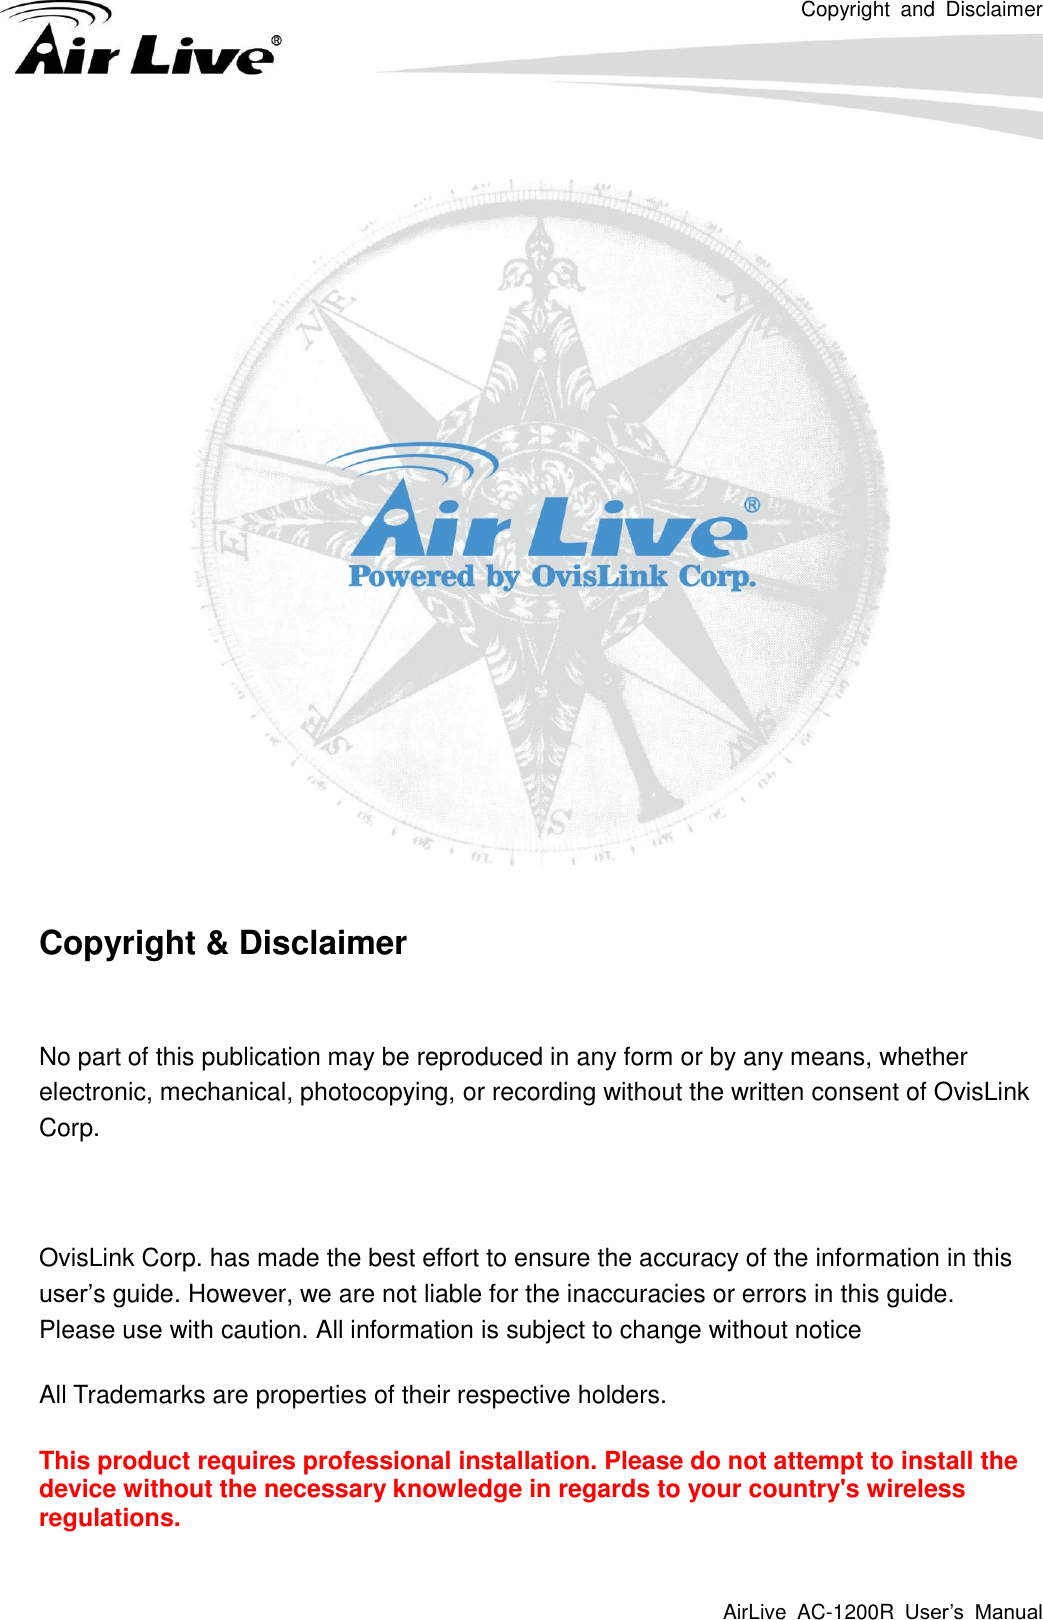 Copyright  and  Disclaimer AirLive  AC-1200R  User’s  Manual      Copyright &amp; Disclaimer  No part of this publication may be reproduced in any form or by any means, whether electronic, mechanical, photocopying, or recording without the written consent of OvisLink Corp.  OvisLink Corp. has made the best effort to ensure the accuracy of the information in this user’s guide. However, we are not liable for the inaccuracies or errors in this guide.   Please use with caution. All information is subject to change without notice All Trademarks are properties of their respective holders. This product requires professional installation. Please do not attempt to install the device without the necessary knowledge in regards to your country&apos;s wireless regulations. 